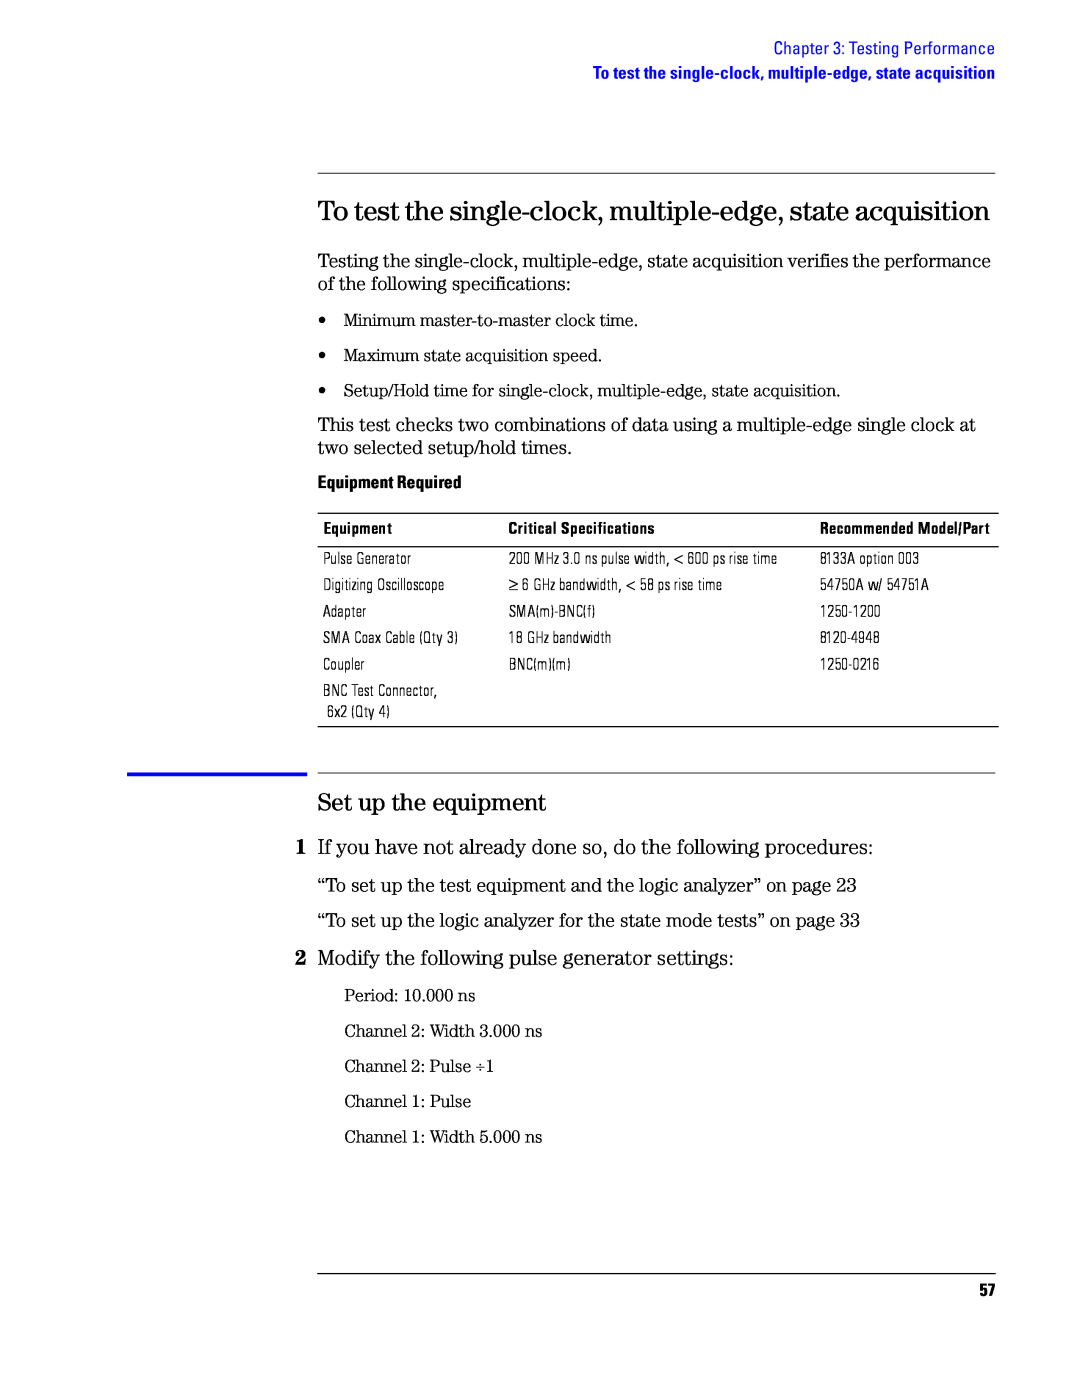 Agilent Technologies 1690, 1680 manual To test the single-clock, multiple-edge, state acquisition, Set up the equipment 